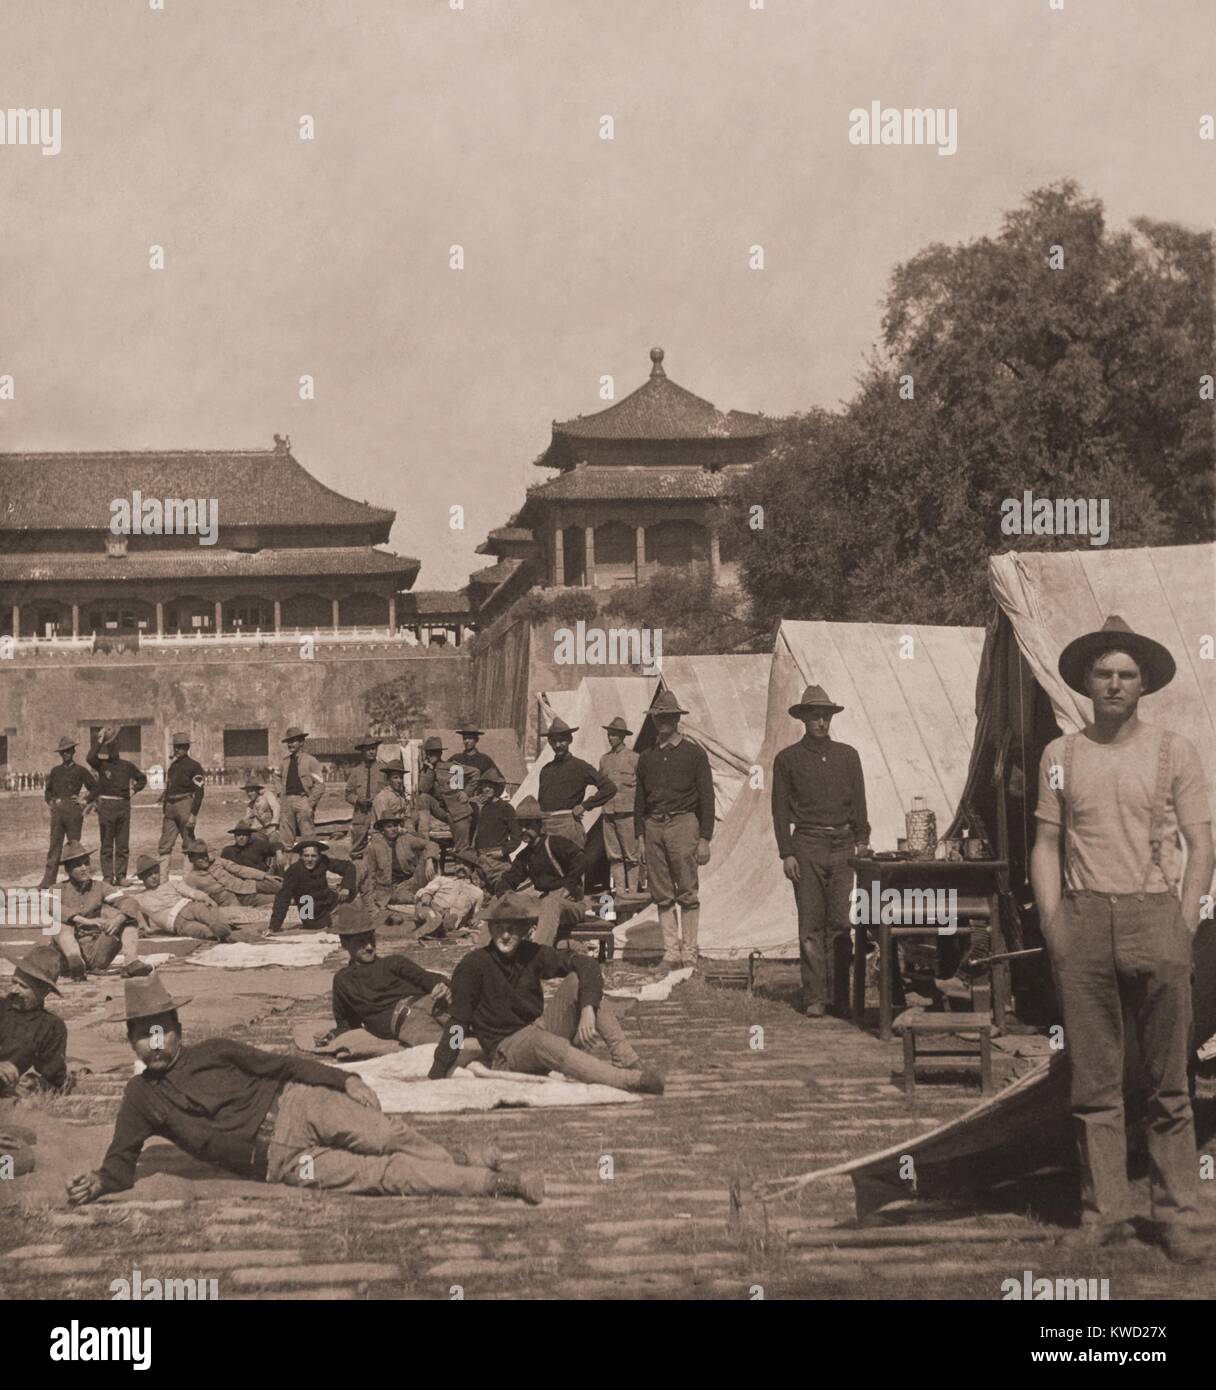 Ninth U.S. Infantry in Camp, in the court of the Forbidden City, Beijing, China, Aug.-Sept, 1900. The 9th Infantry returned to the Philippine Insurrection, leaving the postwar occupation to other allied forces  (BSLOC 2017 20 33) Stock Photo